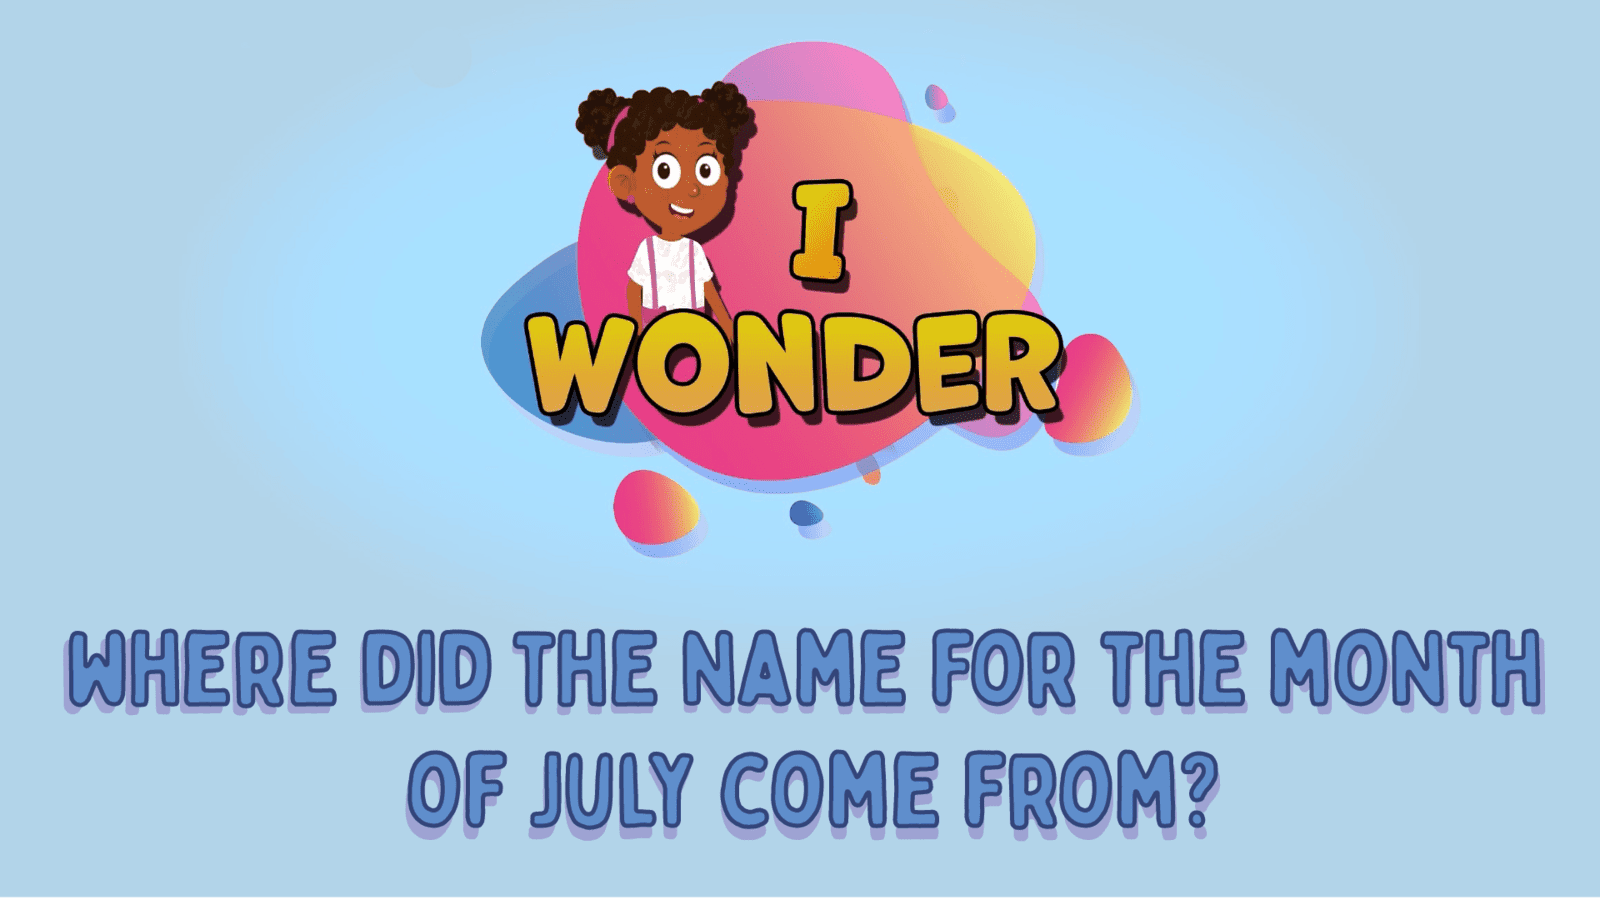 Where Did The Name For The Month Of July Come From?